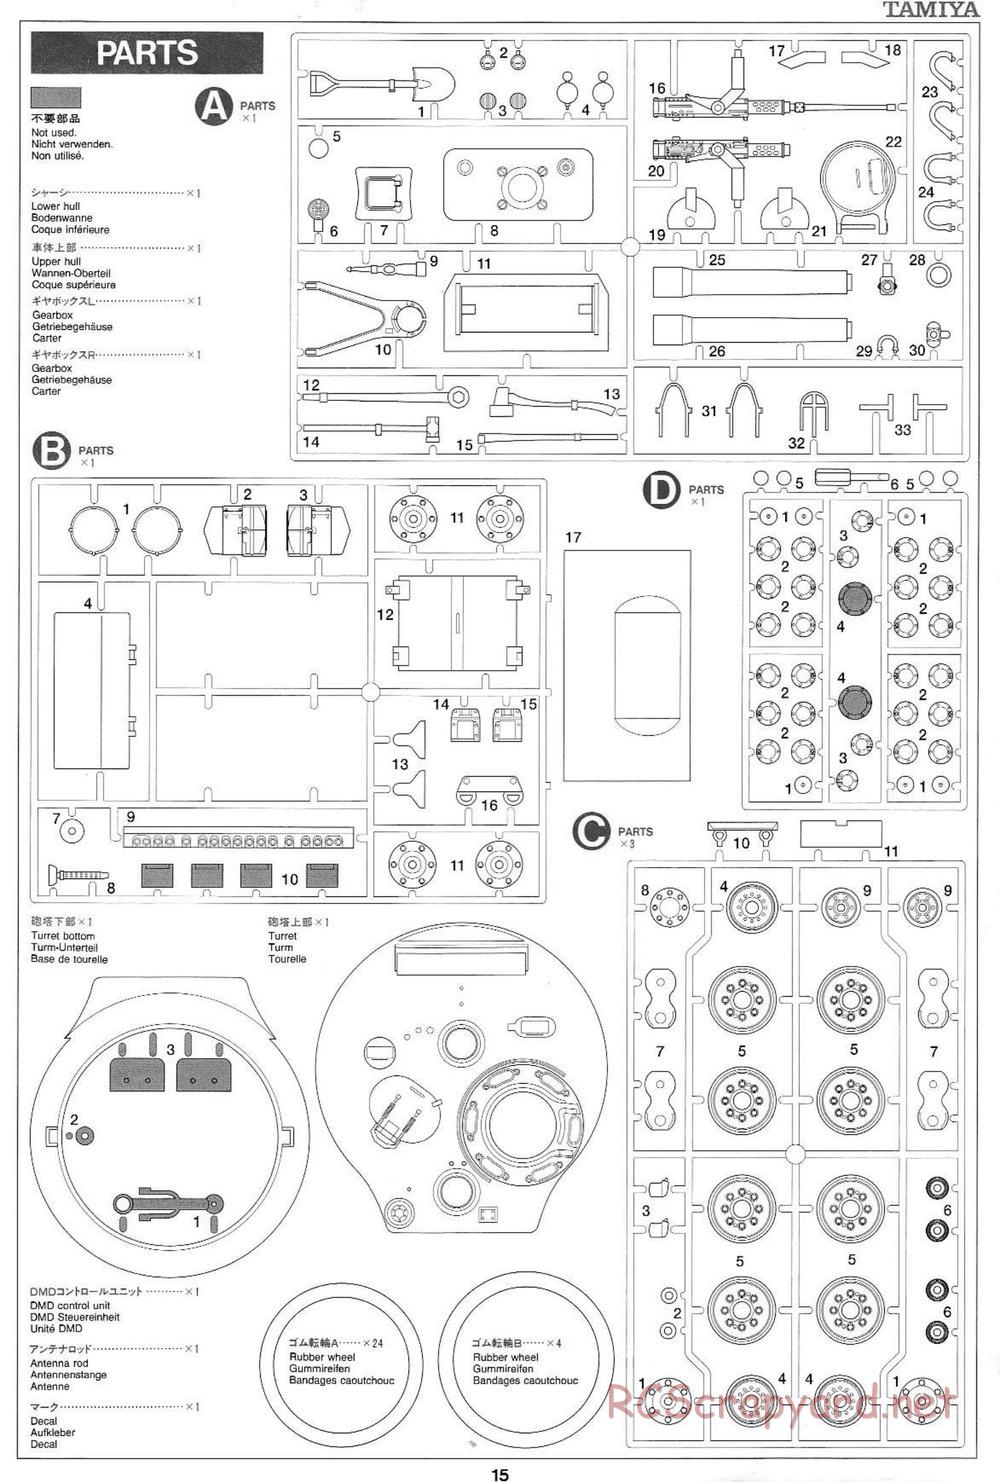 Tamiya - M4 Sherman 105mm Howitzer - 1/16 Scale Chassis - Manual - Page 15